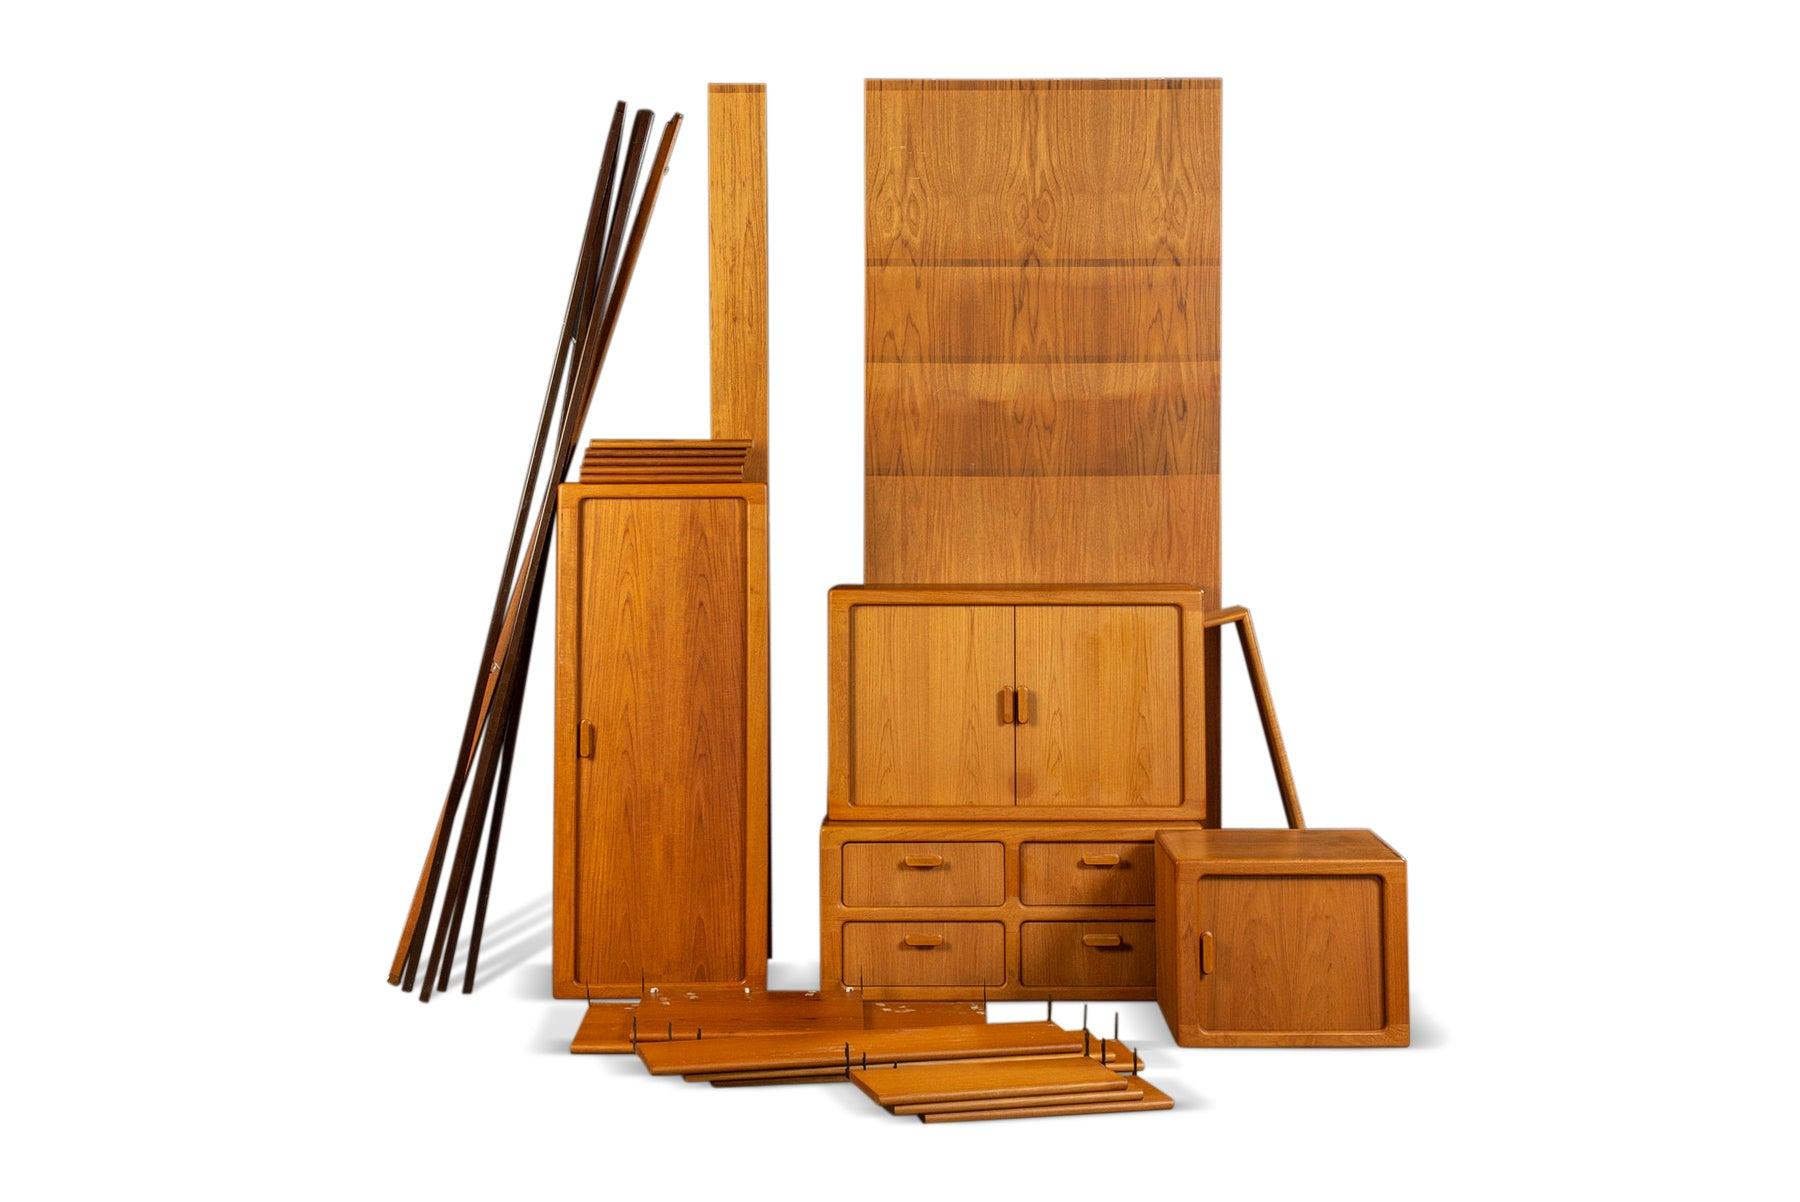 Danish Modern Teak Mid Century Wall Unit / System By CFC Silkeborg #2 In Excellent Condition For Sale In Berkeley, CA